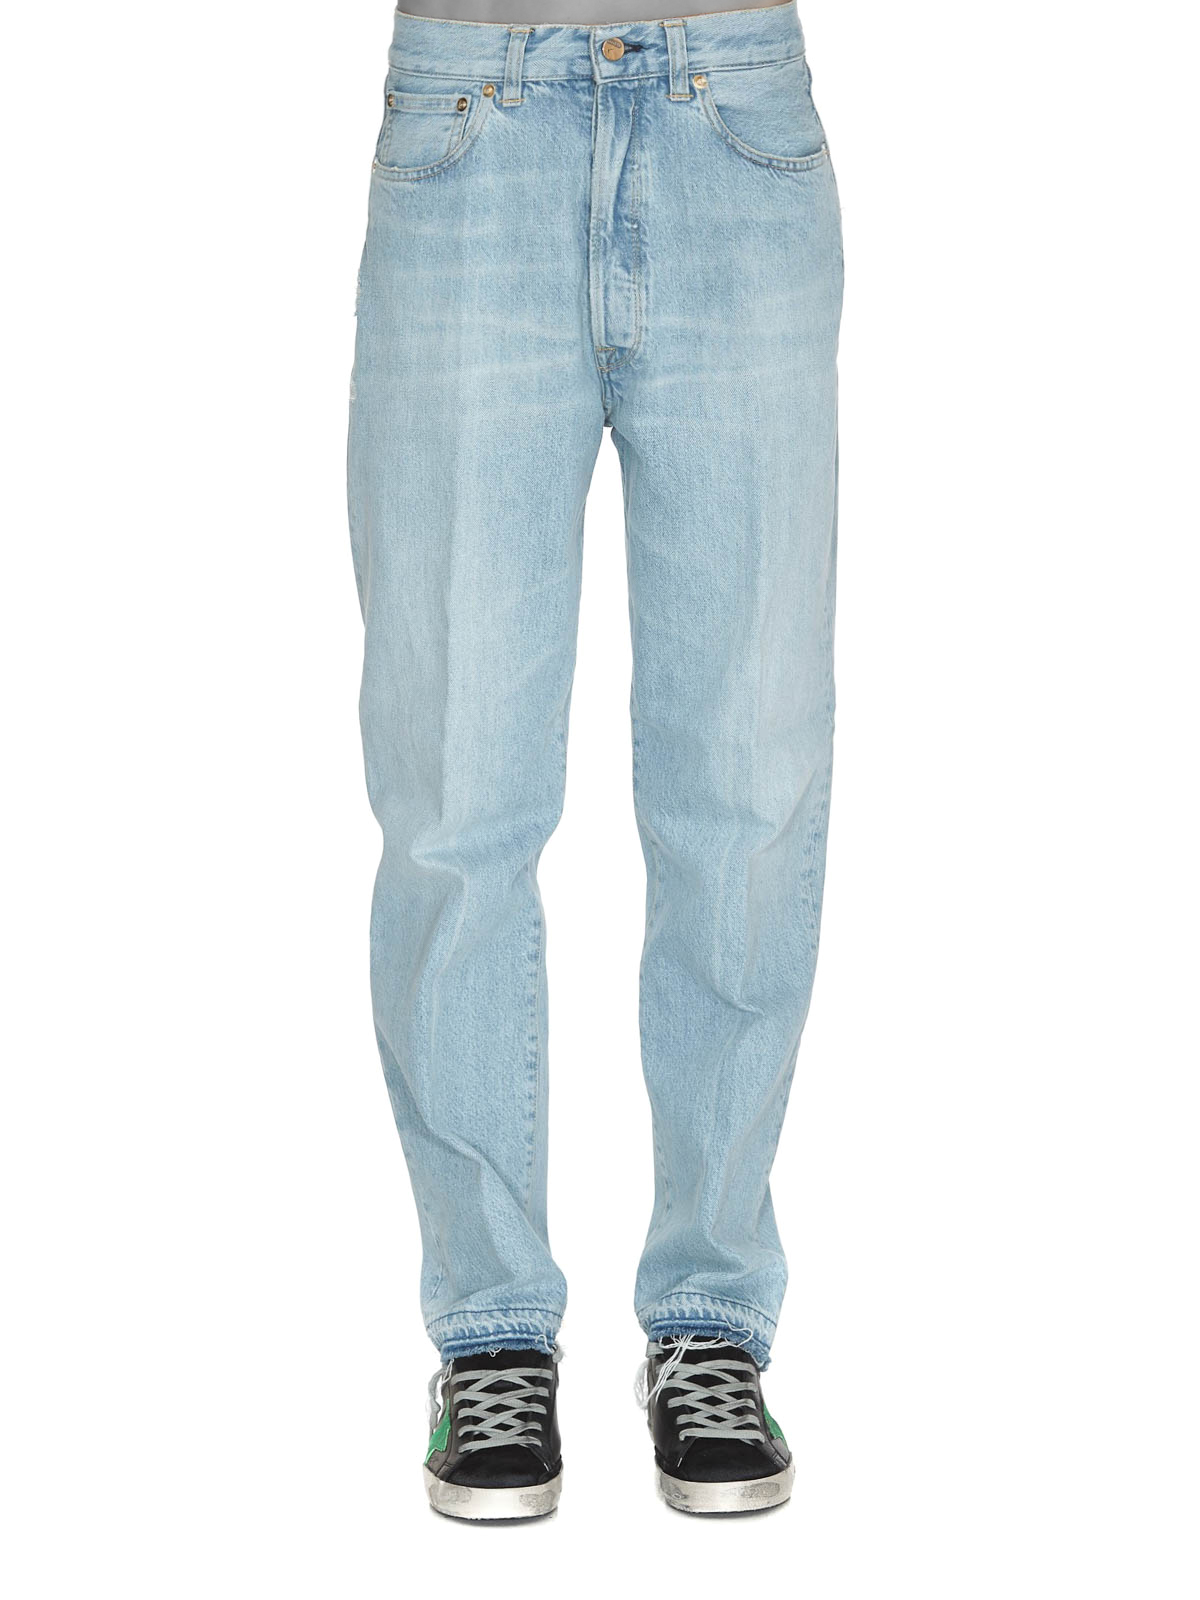 high rise light wash jeans